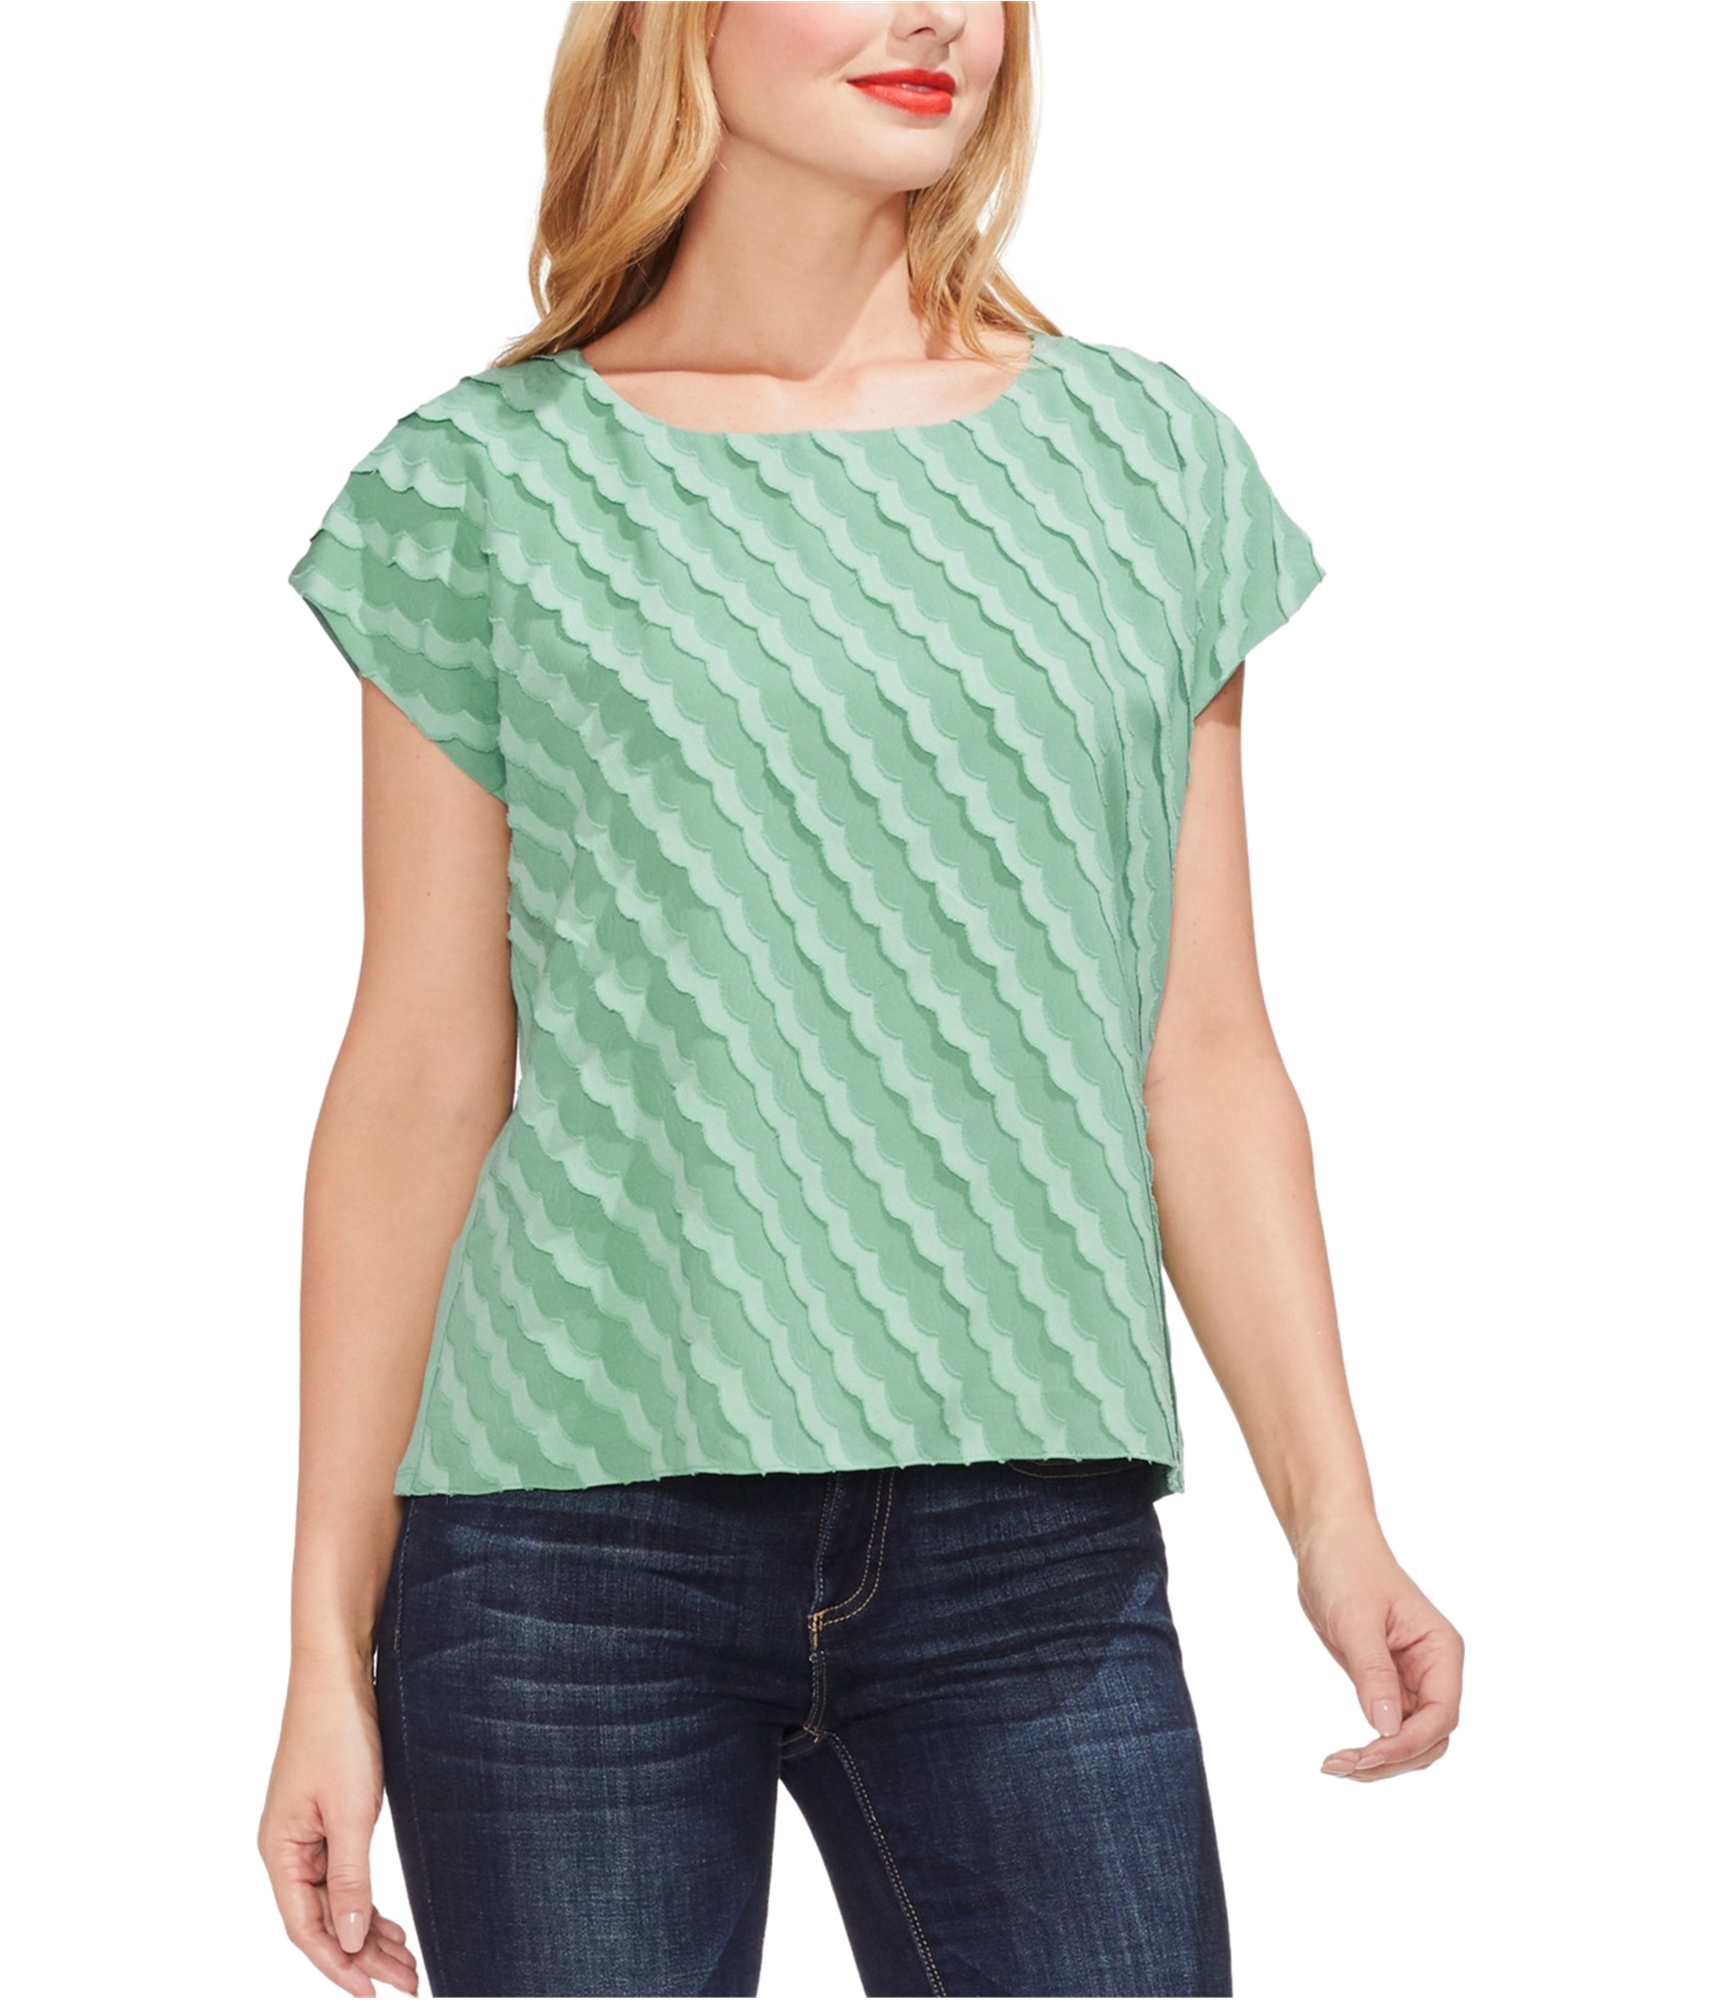 Vince Camuto Womens Striped Sheer Pullover Top